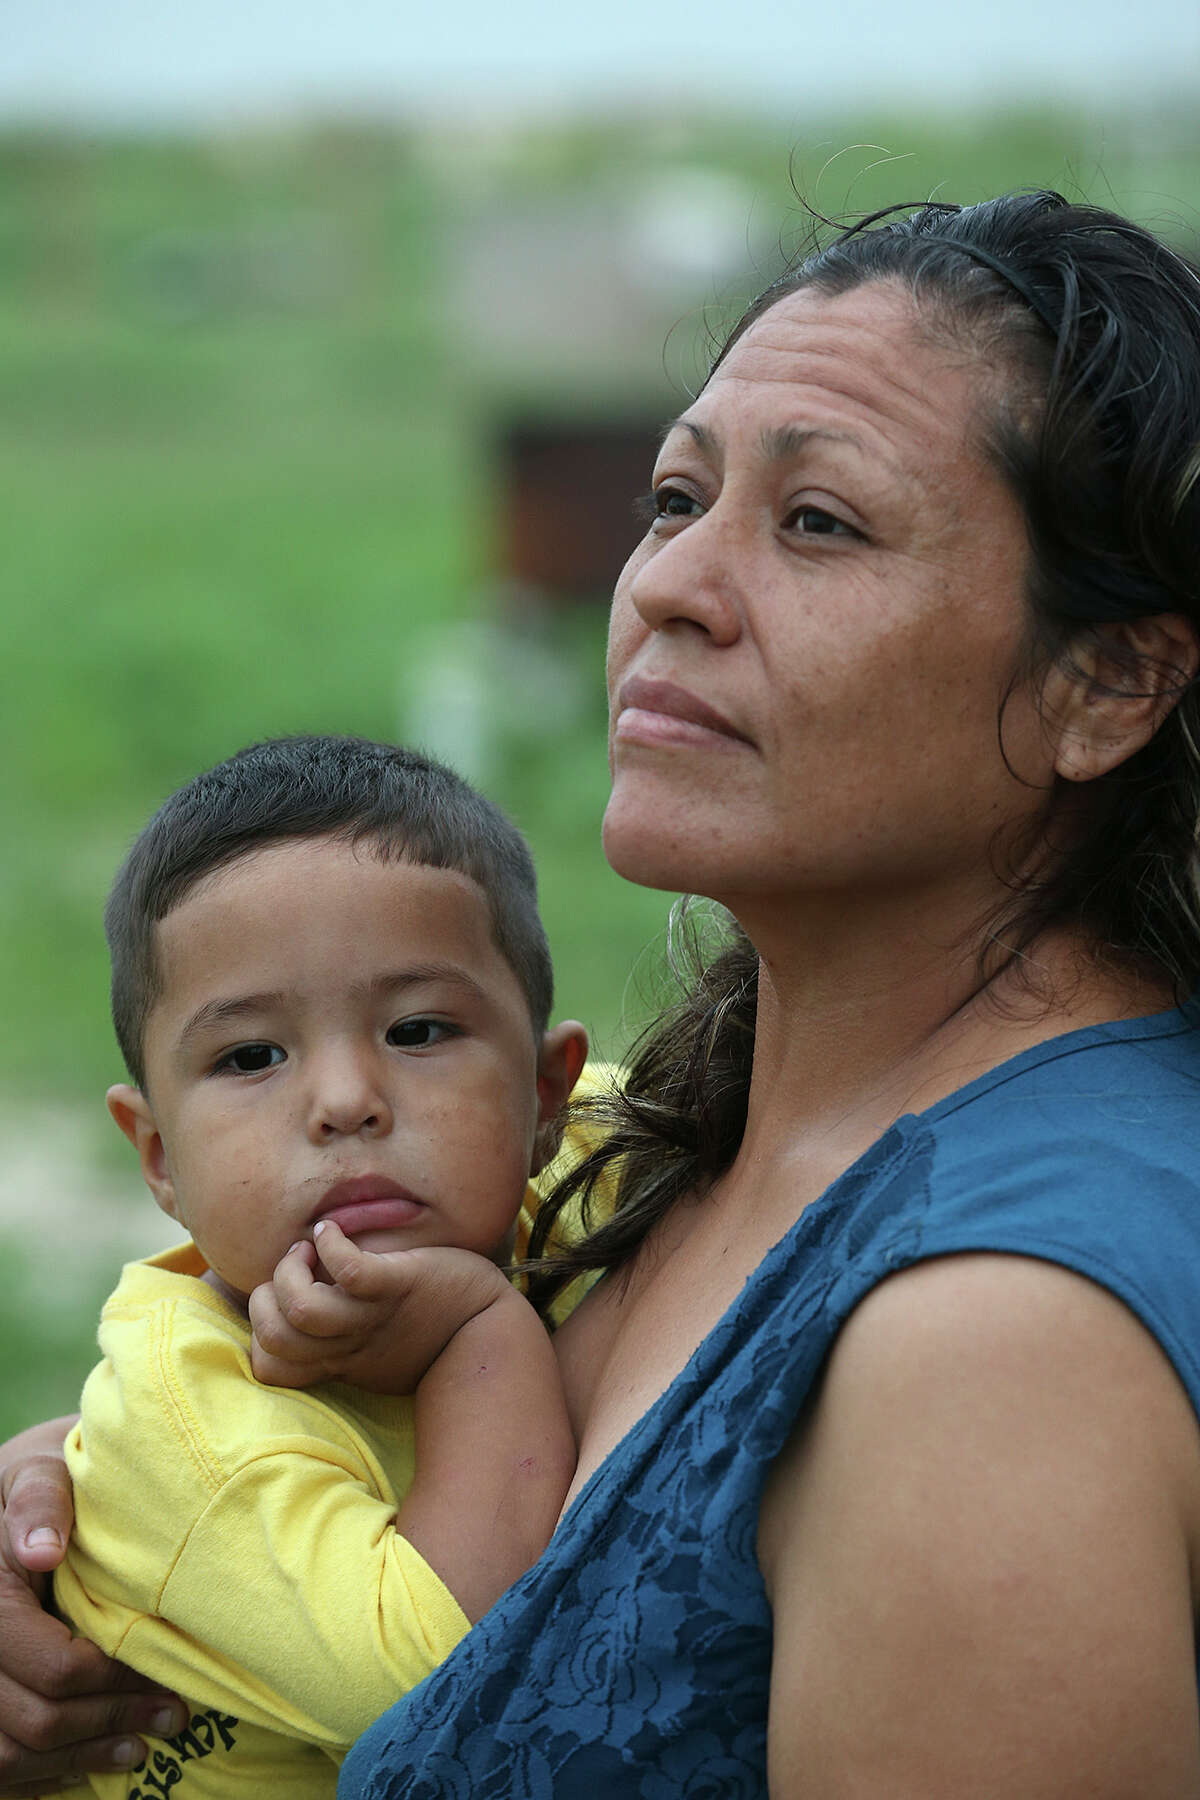 Rosie Rodriguez, 30, right, holds her son Adolfo, 2, as she talks of finally buying land in the Maize 5 colonia near Donna, Texas, Thursday, May 21, 2015. The one-street colonia is comprised of half-acre lots that cost $30,000. The lots come with electrical and water hook ups that drive the price up. A plot of land that sold for $5,000 a decade ago might be sold for as much as $30,000 today, leaving low income families with little money to invest quality materials to build their homes, leading to new developments the Fed has dubbed the "new colonias." Their owner financed plot of land comes at a steep price, almost 20-percent interest on a 20 year lone. Rodriguez and her family moved an old mobile home into their plot and are in the process of trying to fix it up.